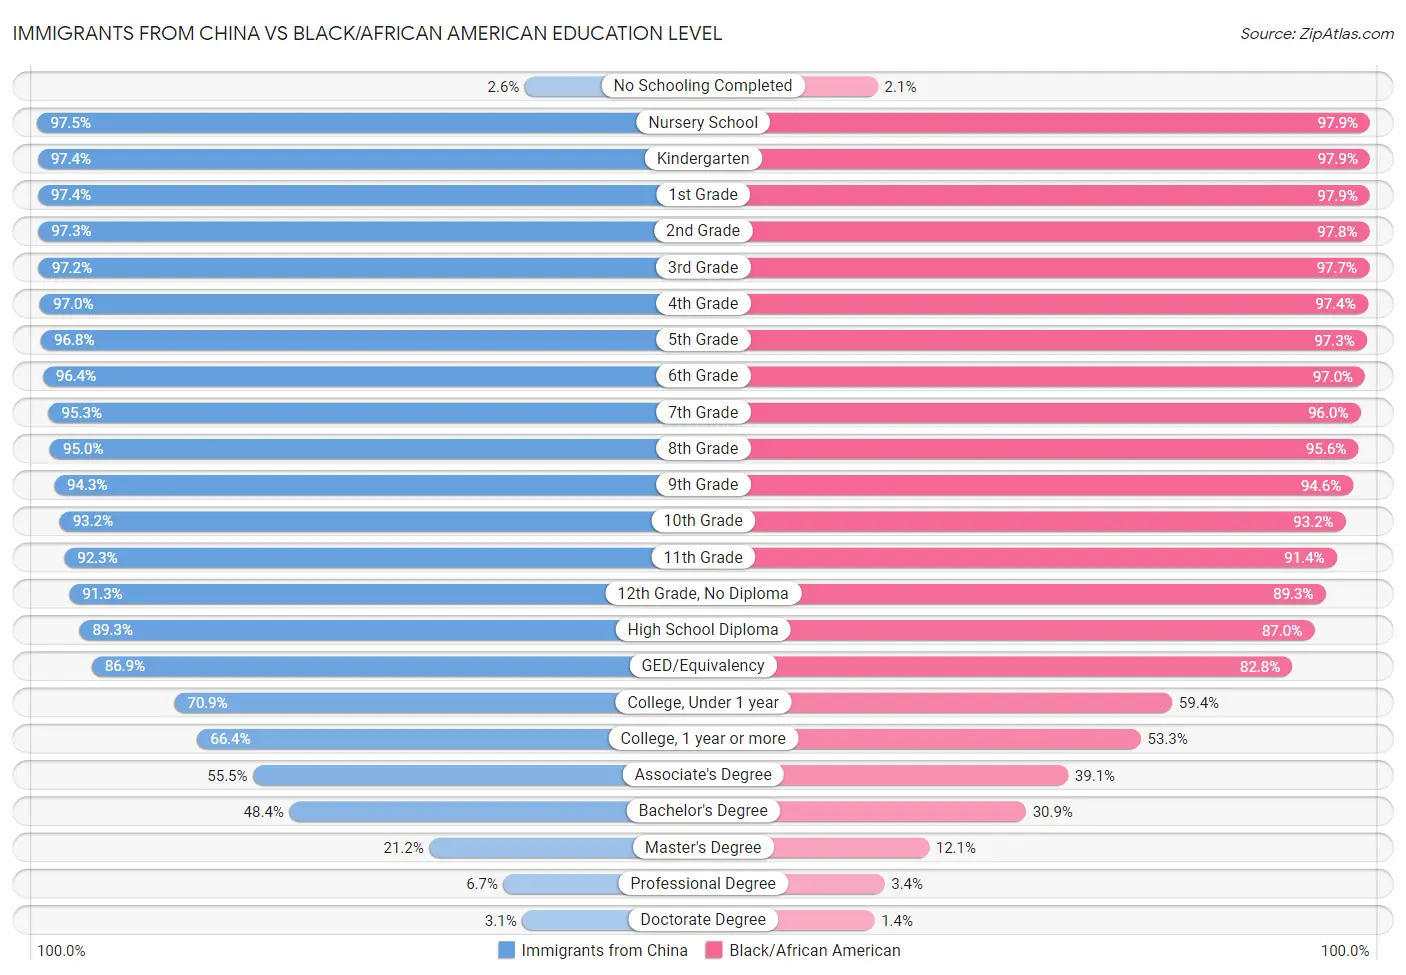 Immigrants from China vs Black/African American Education Level